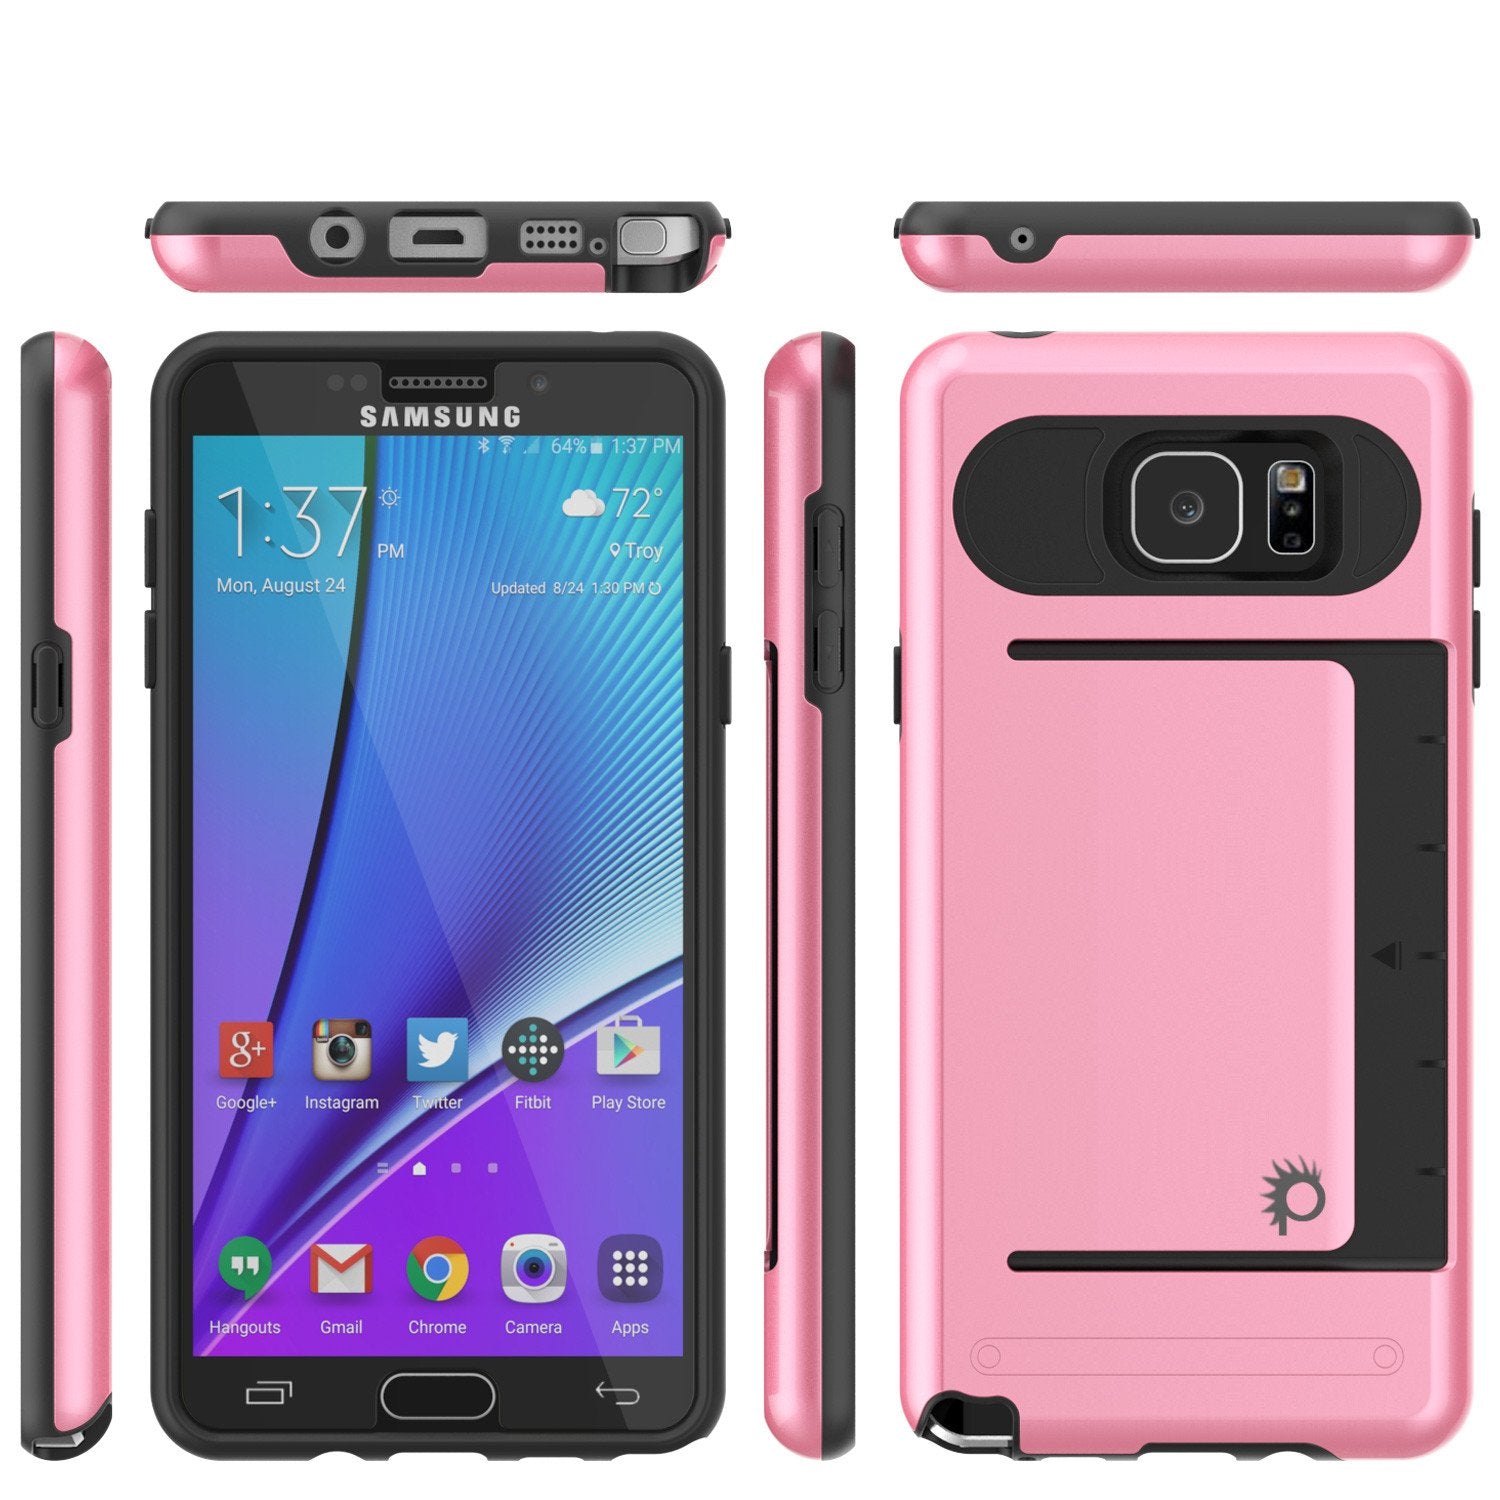 Galaxy Note 5 Case PunkCase CLUTCH Pink Series Slim Armor Soft Cover Case w/ Tempered Glass